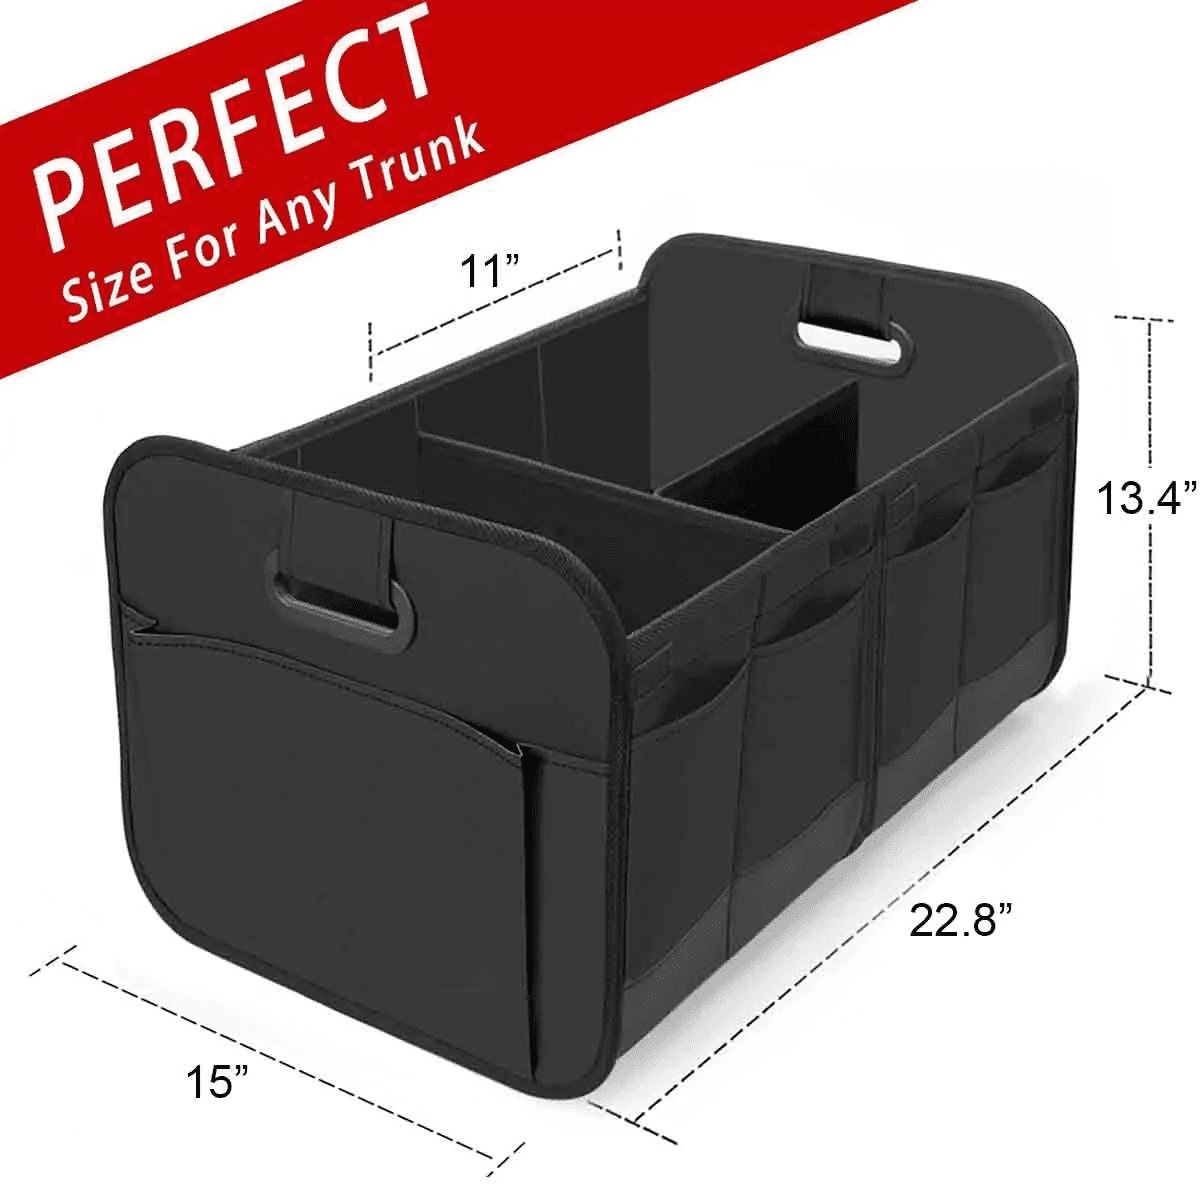 Custom Text Car Trunk Organizer Storage, Fit with all car, Car Storage, Reinforced Handles, Collapsible Multi, Compartment Car Organizers, Foldable and Waterproof, 600D Oxford Polyester